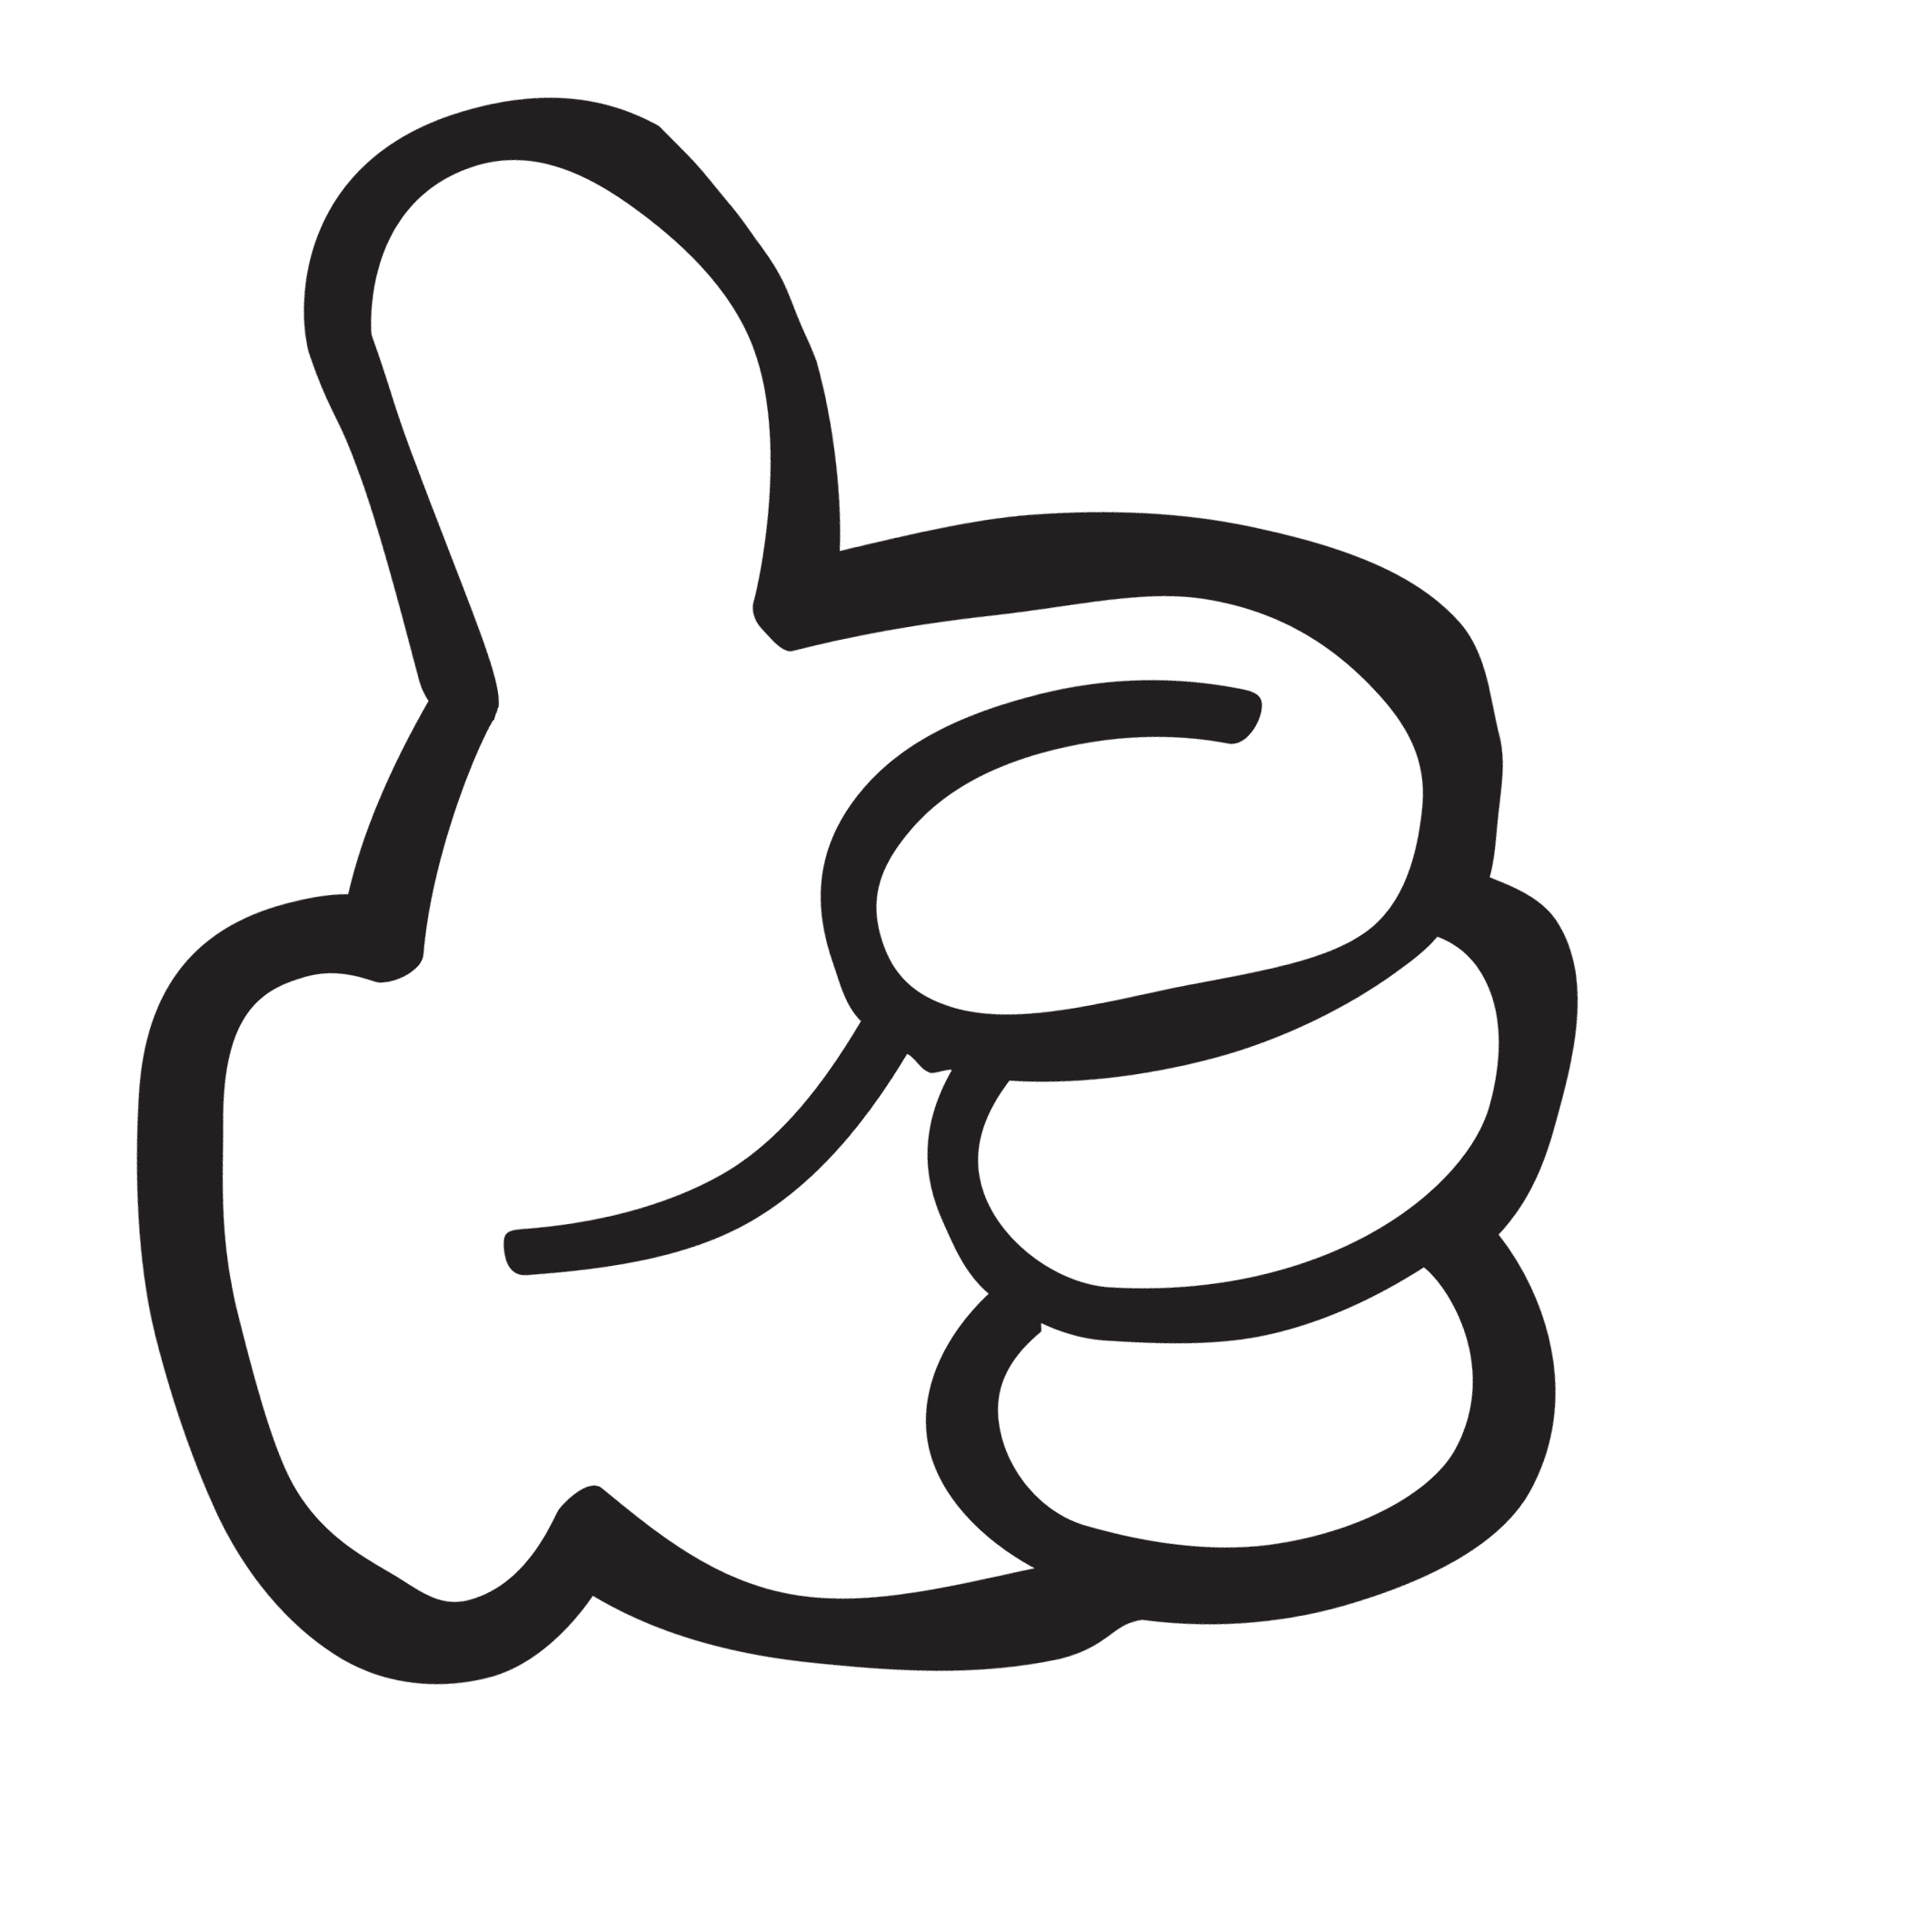 Animated thumbs up clipart images gallery for free download